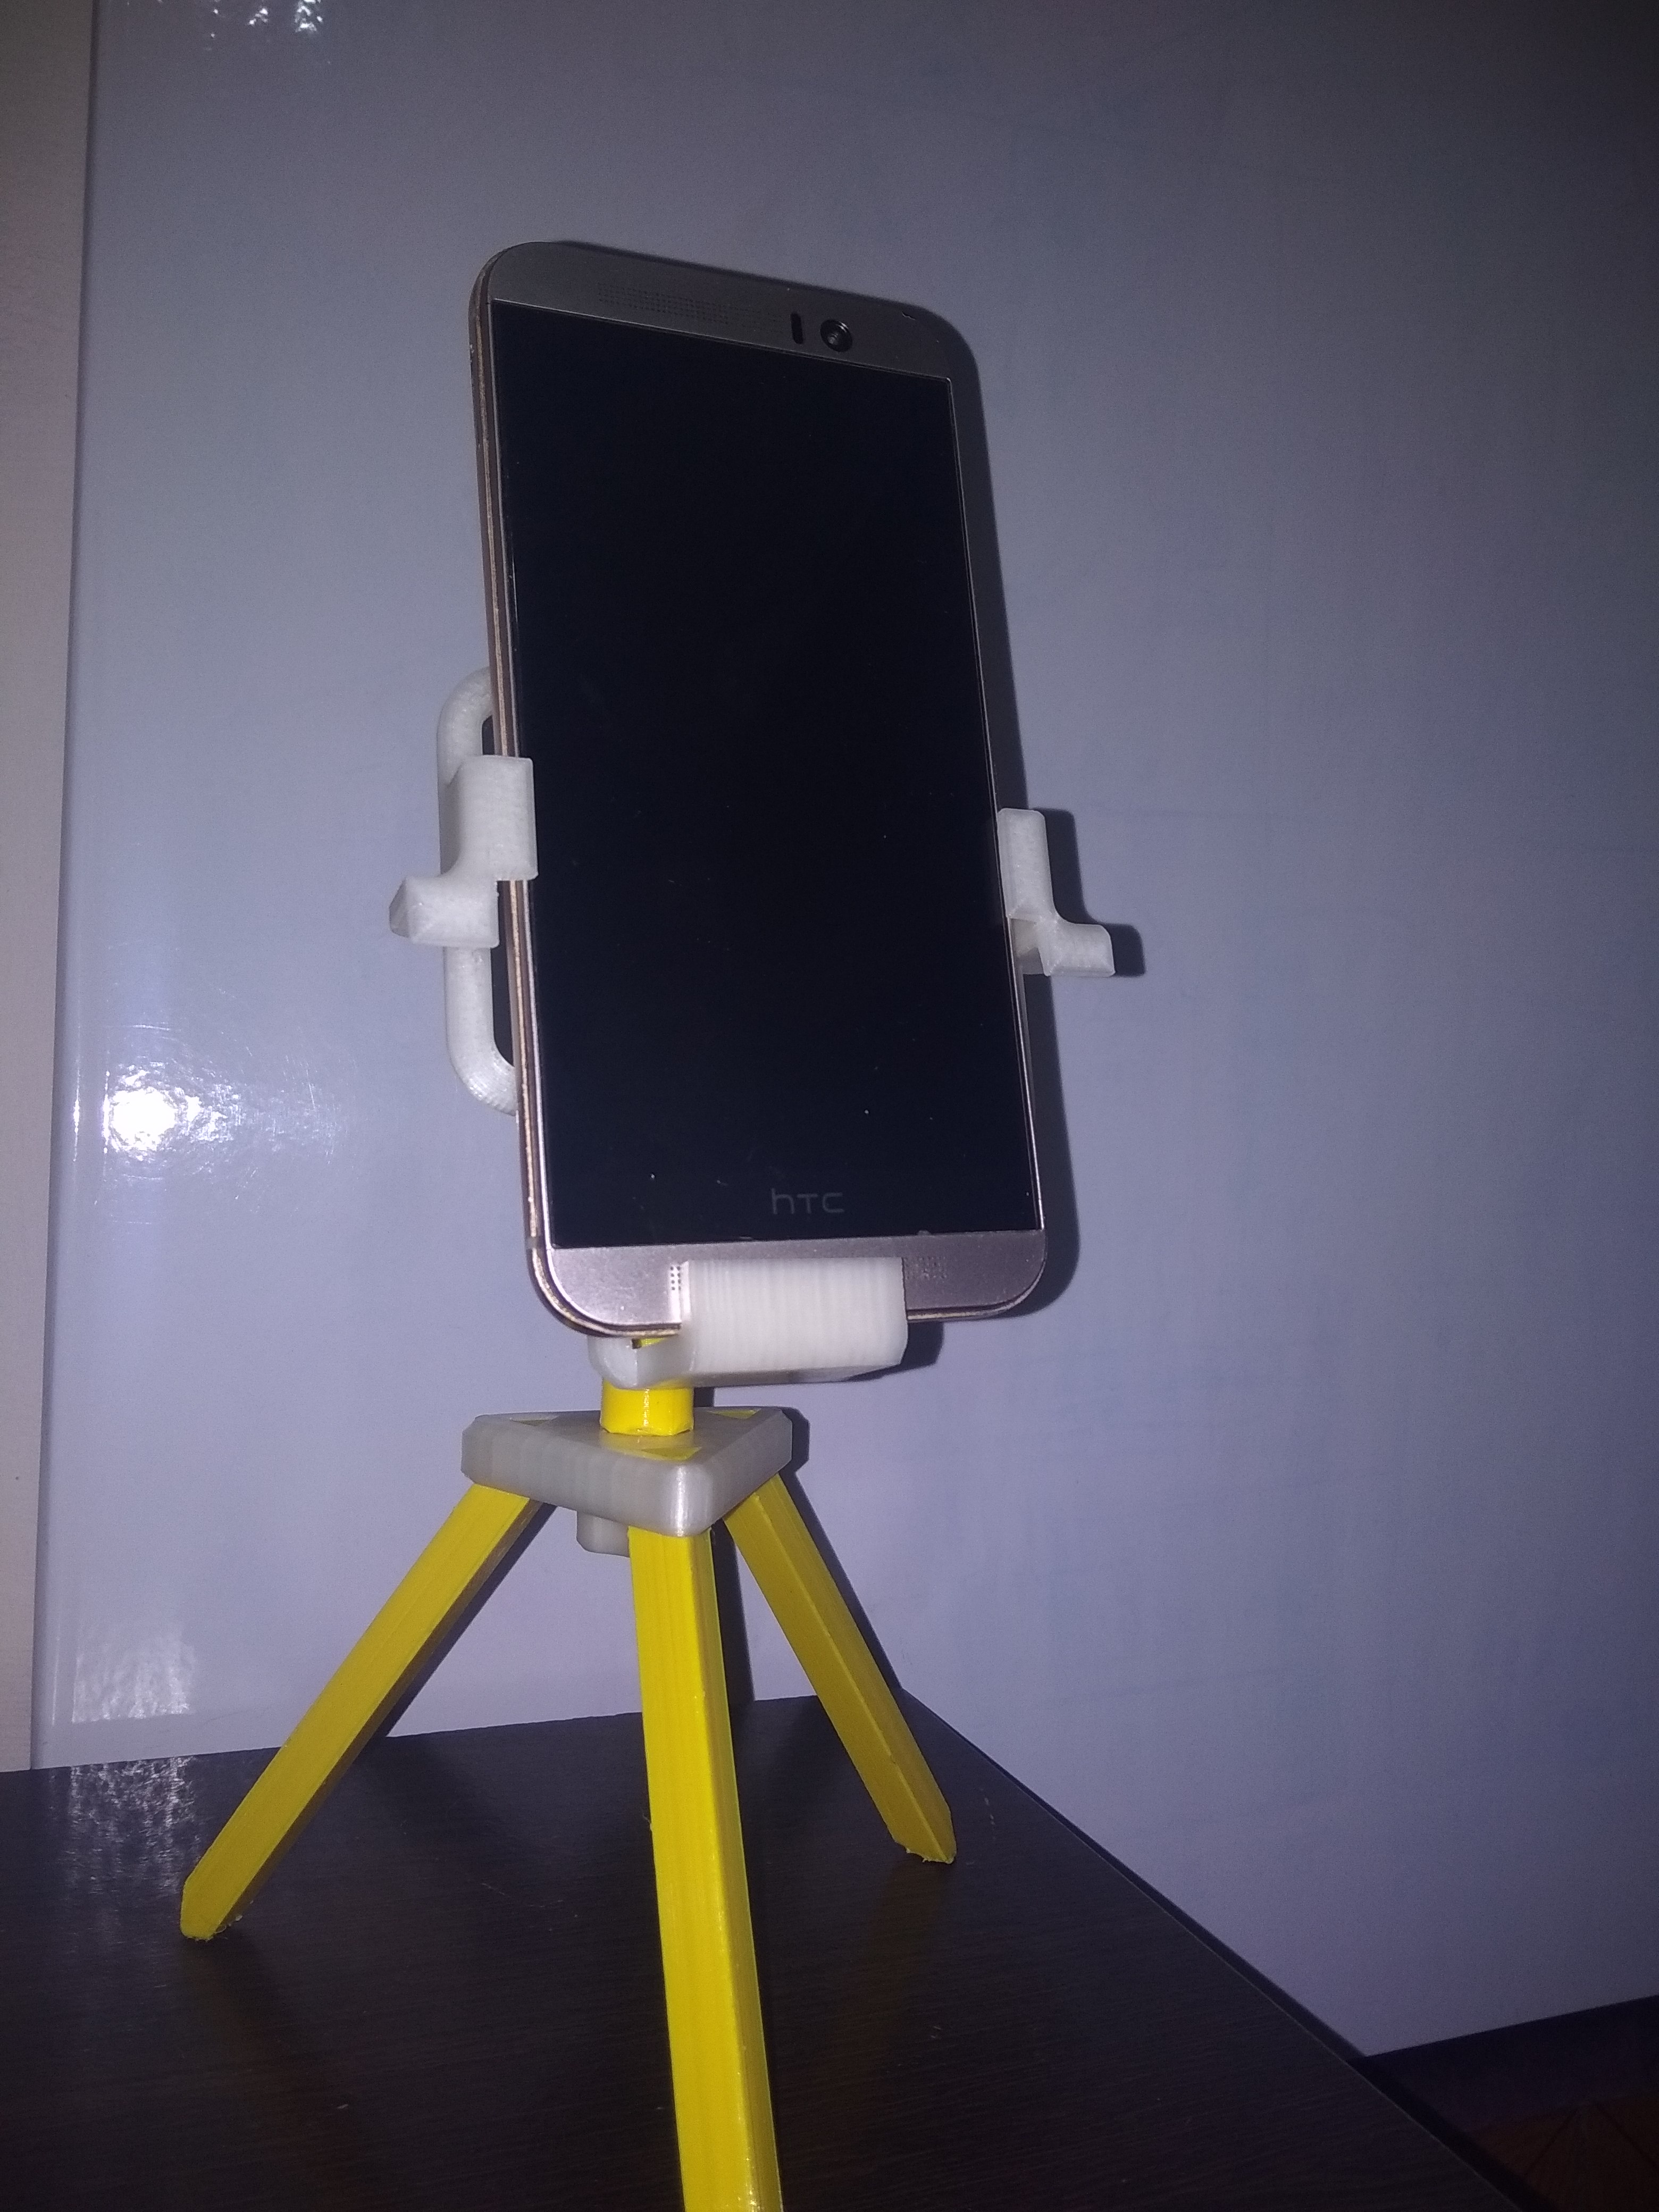 3D Printable Adjustable tripod for smartphone by Corentin Paquet